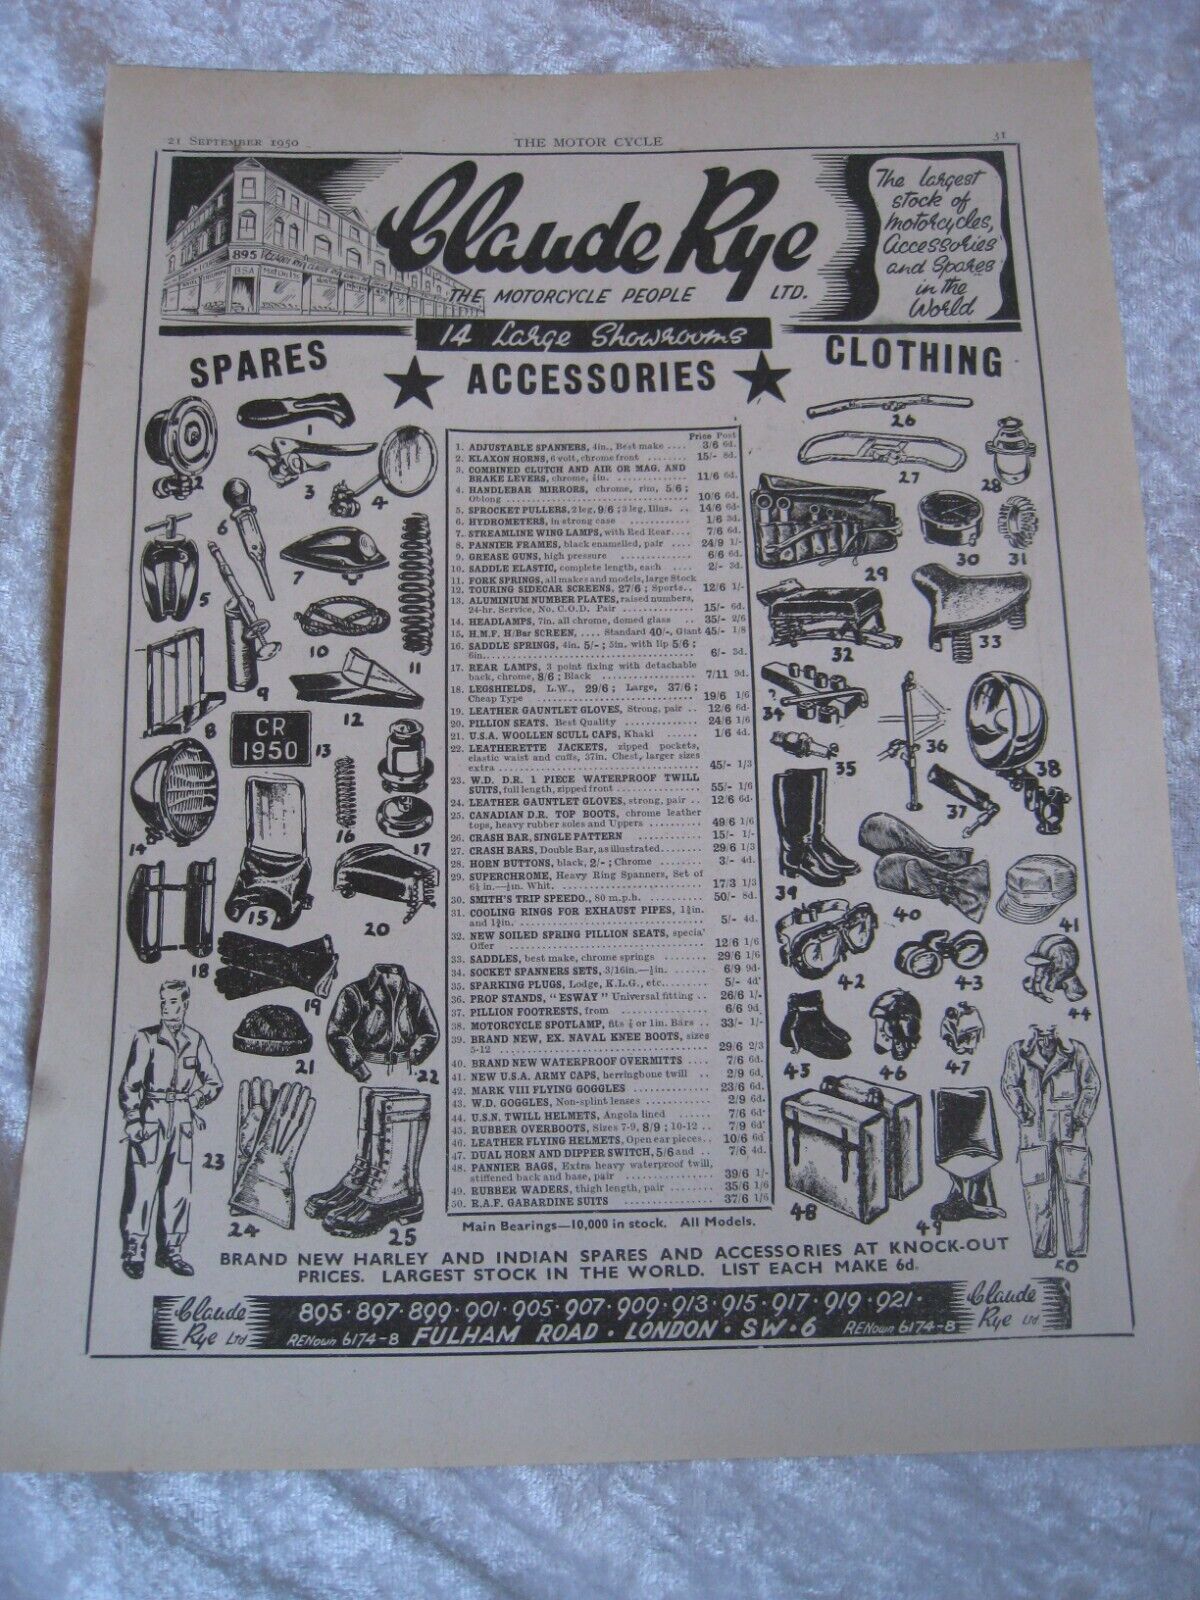 CLAUDE RYE THE MOTORCYCLE PEOPLE LTD ACCESSORIES 1950 POSTER ADVERT A4 FILE 30